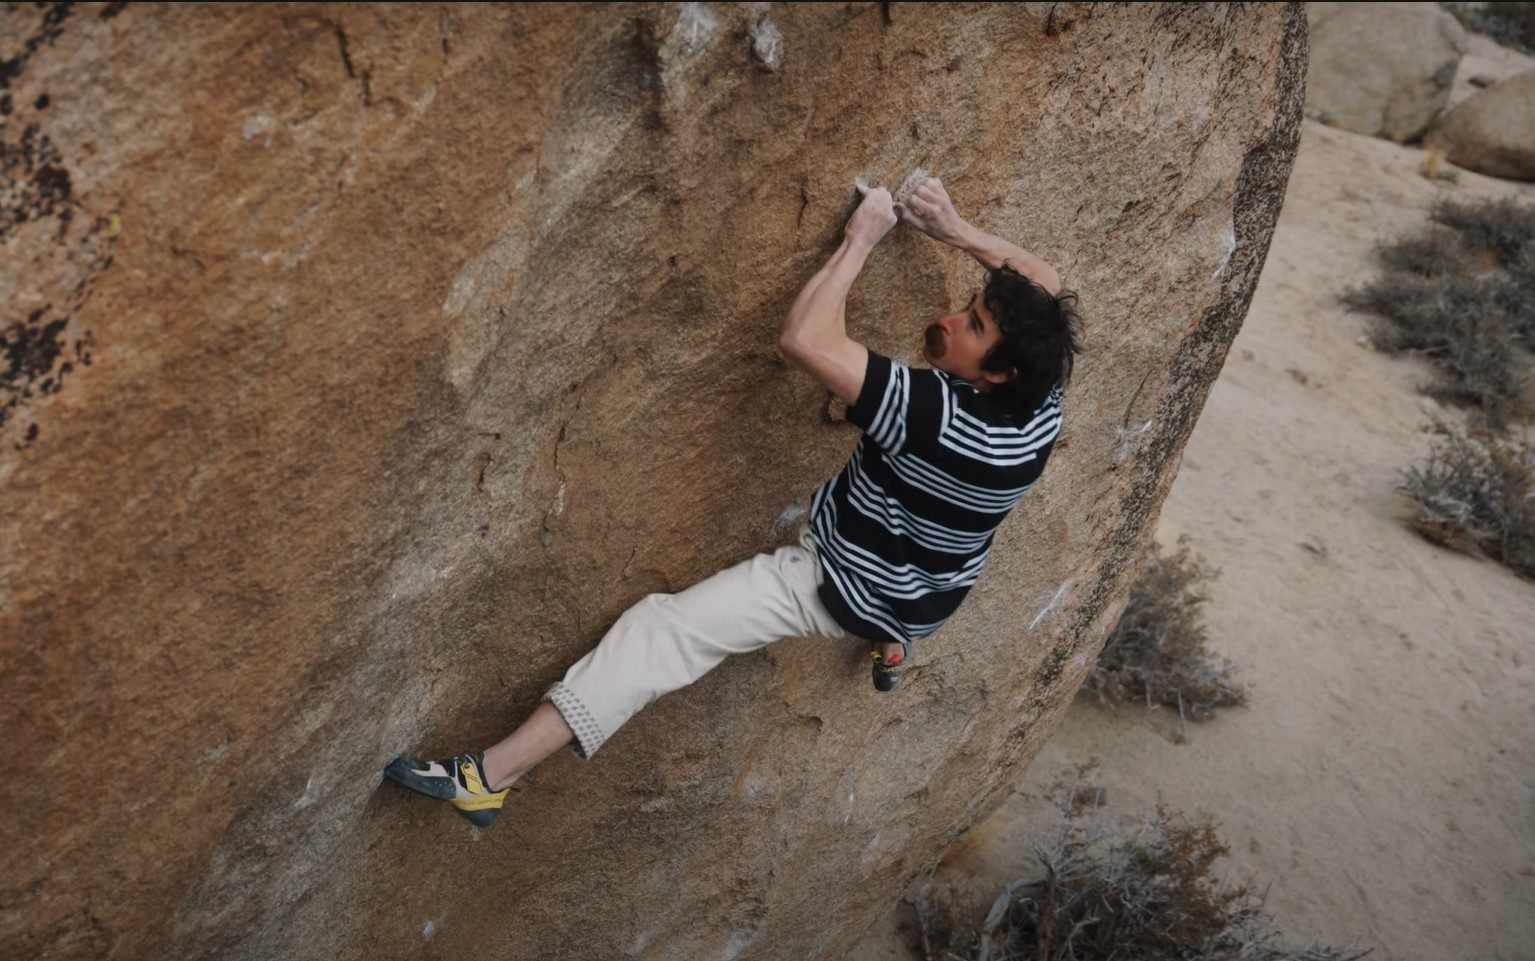 Keenan Takahashi Makes History with First Ascent of The Gold Standard V15